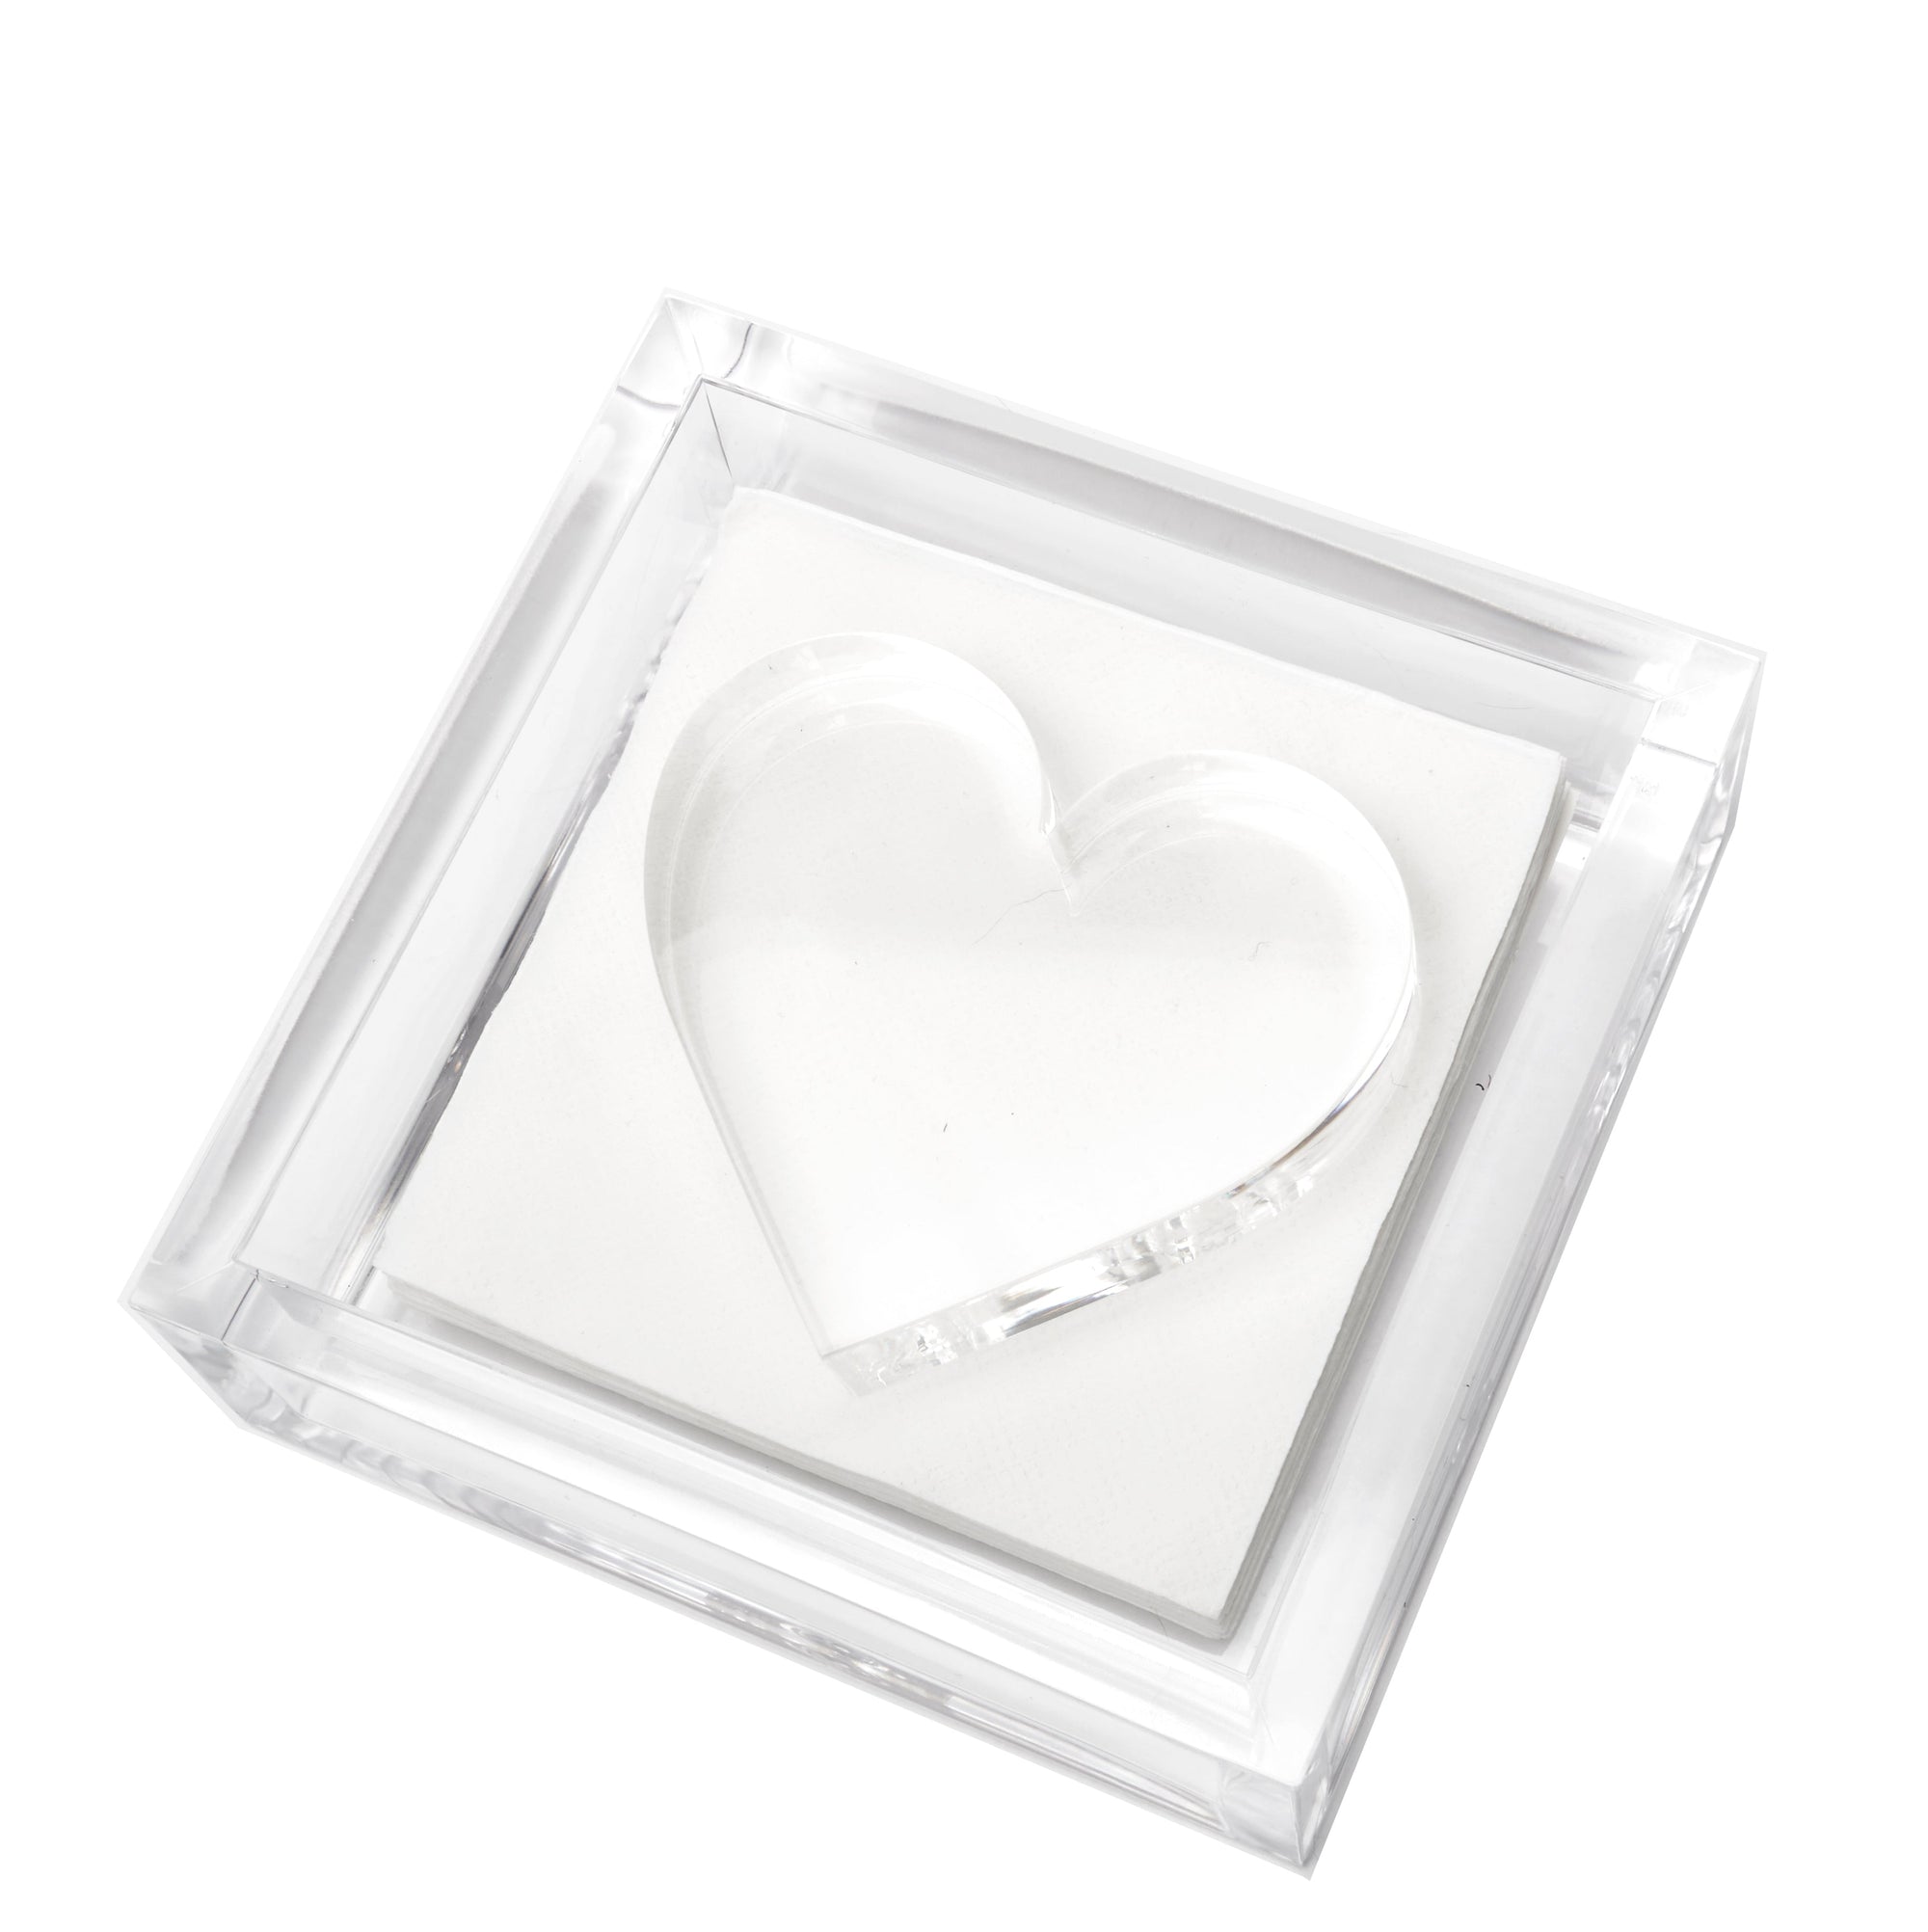 Cocktail Napkin Holder HEART 4 inches by 4 inches 